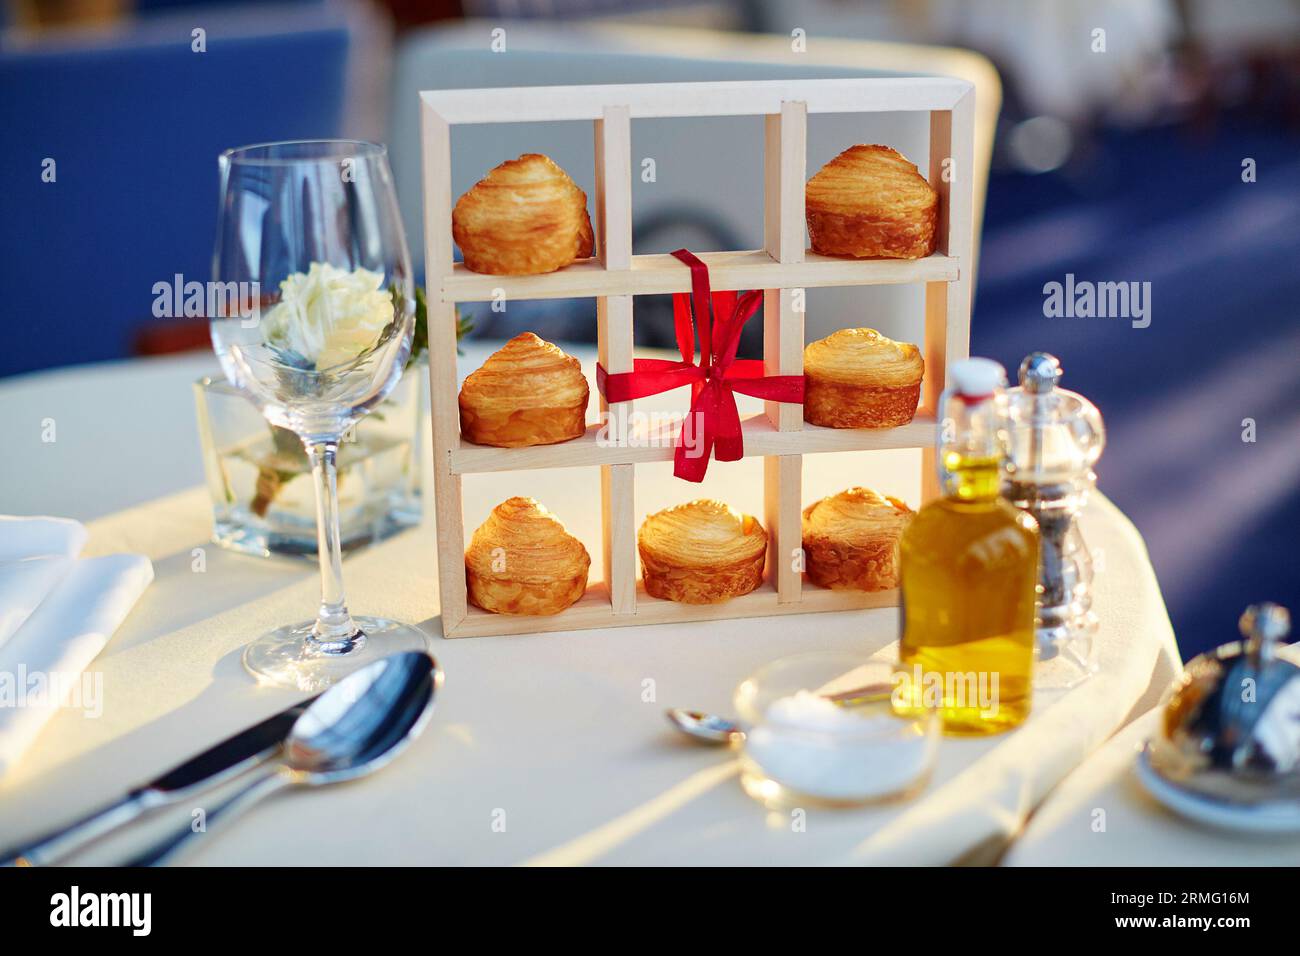 Delicious little cakes in a restaurant Stock Photo